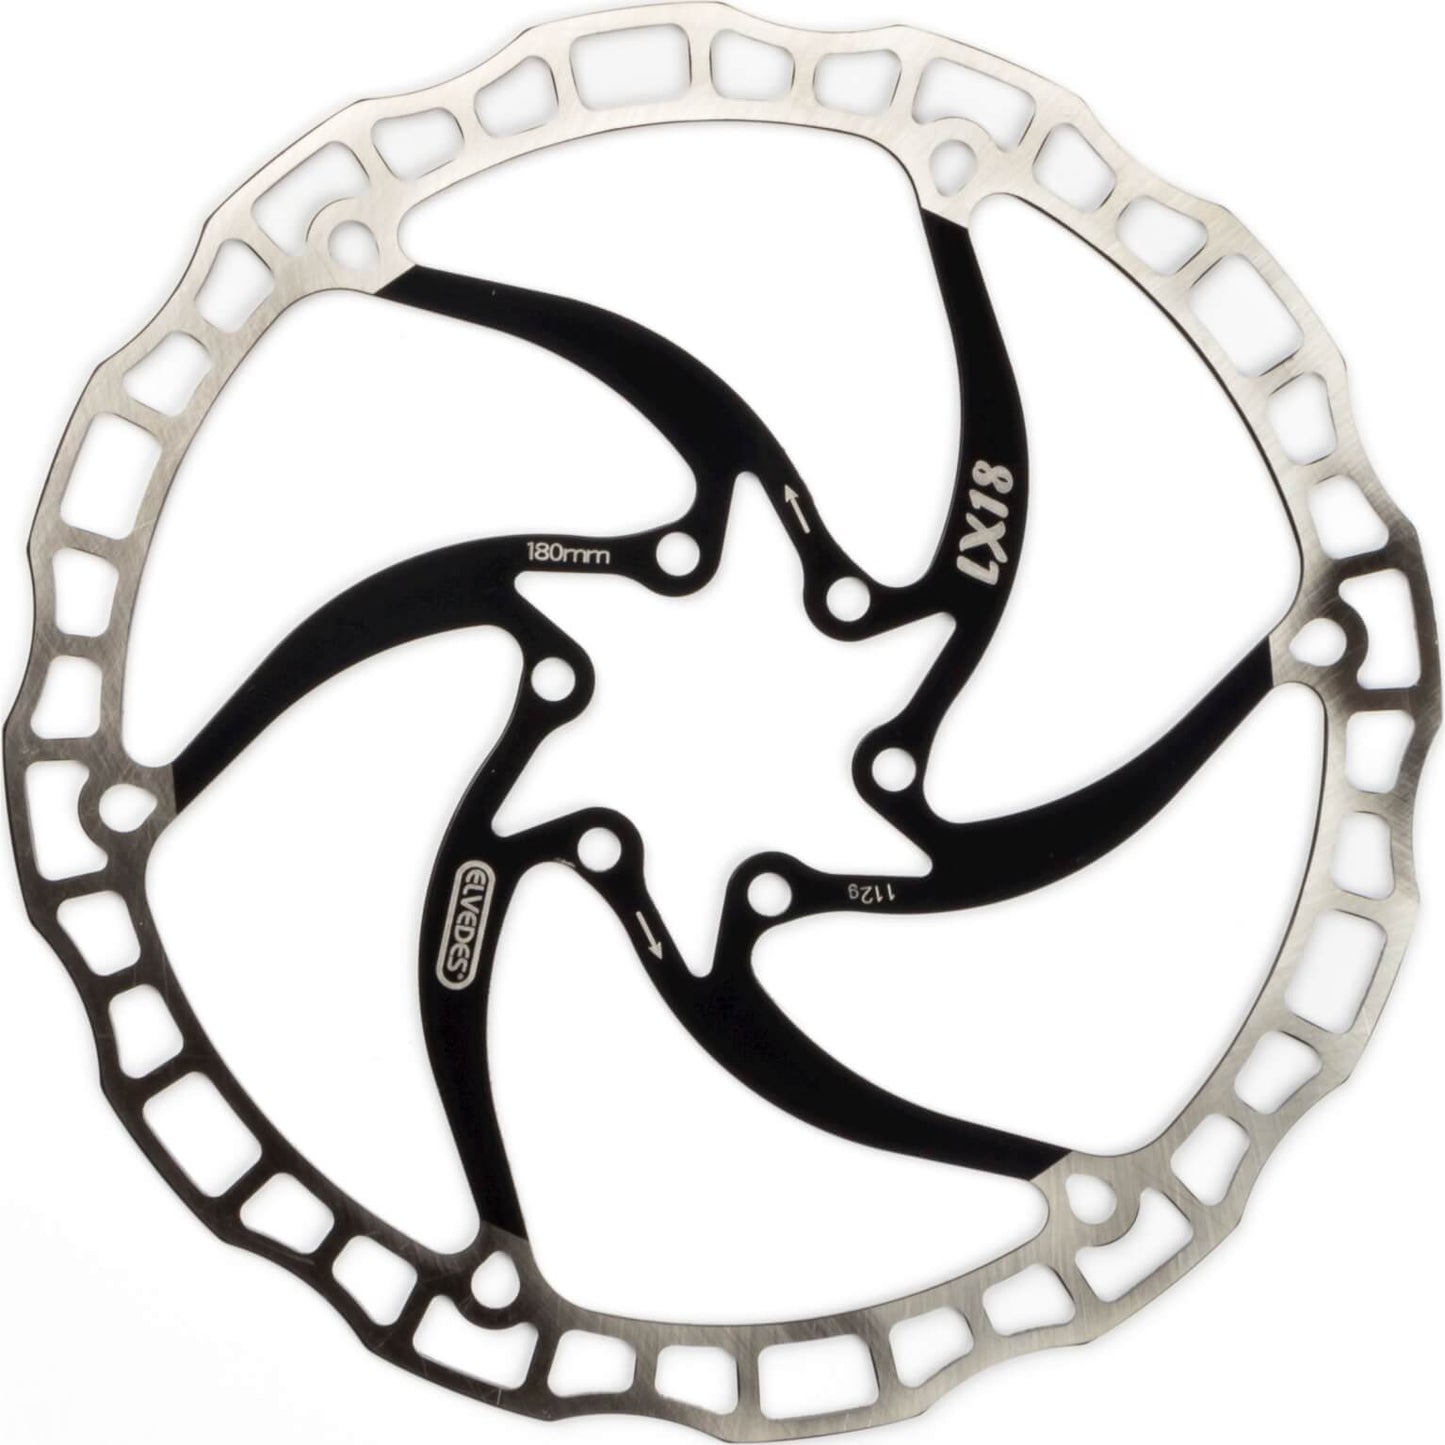 Elvedes One Piece Rotor 180 mm 112g 6 hoyos+Bout Black 2015197